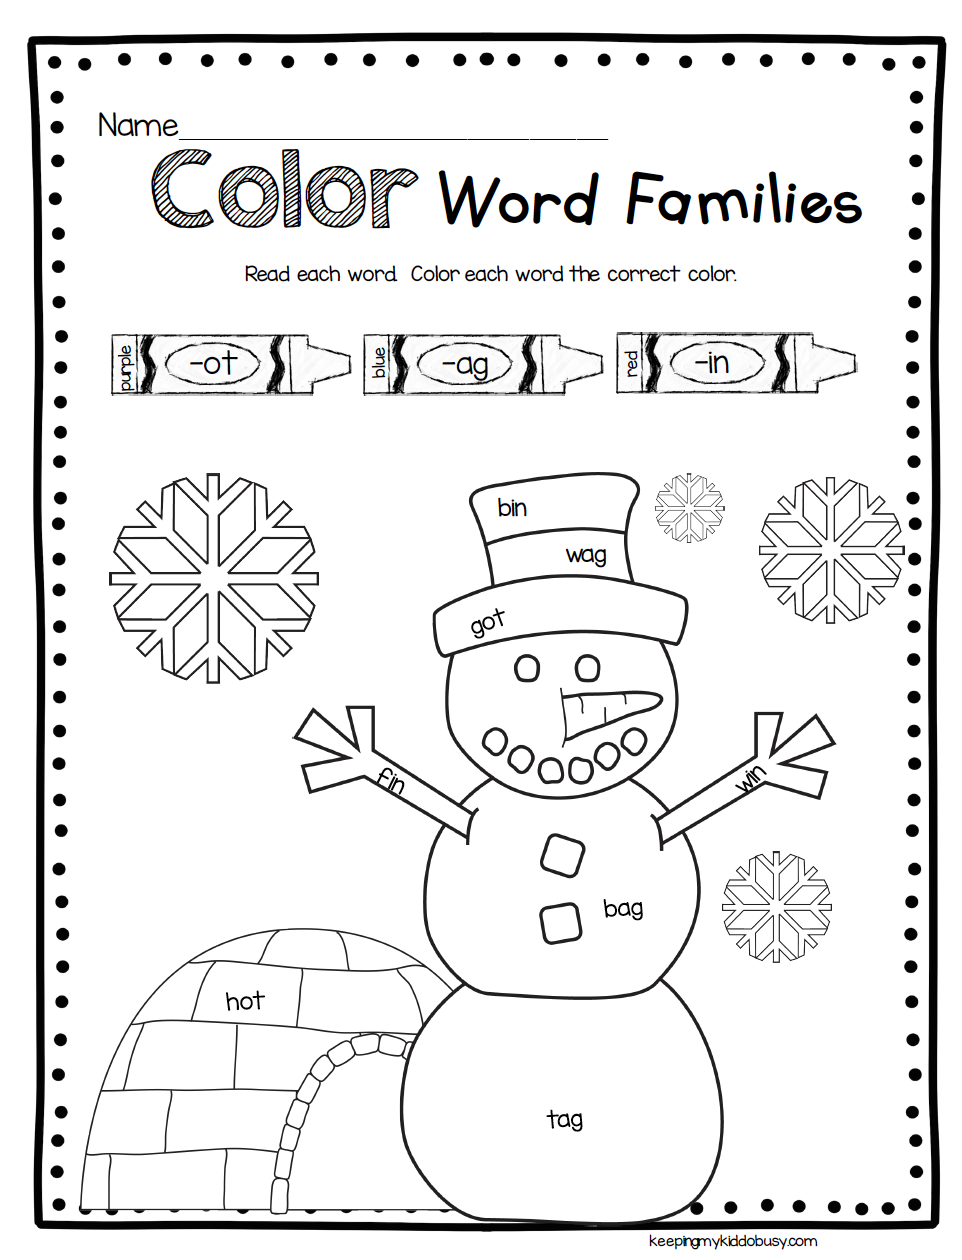 Free color the snowman by word families page! Click preview and print